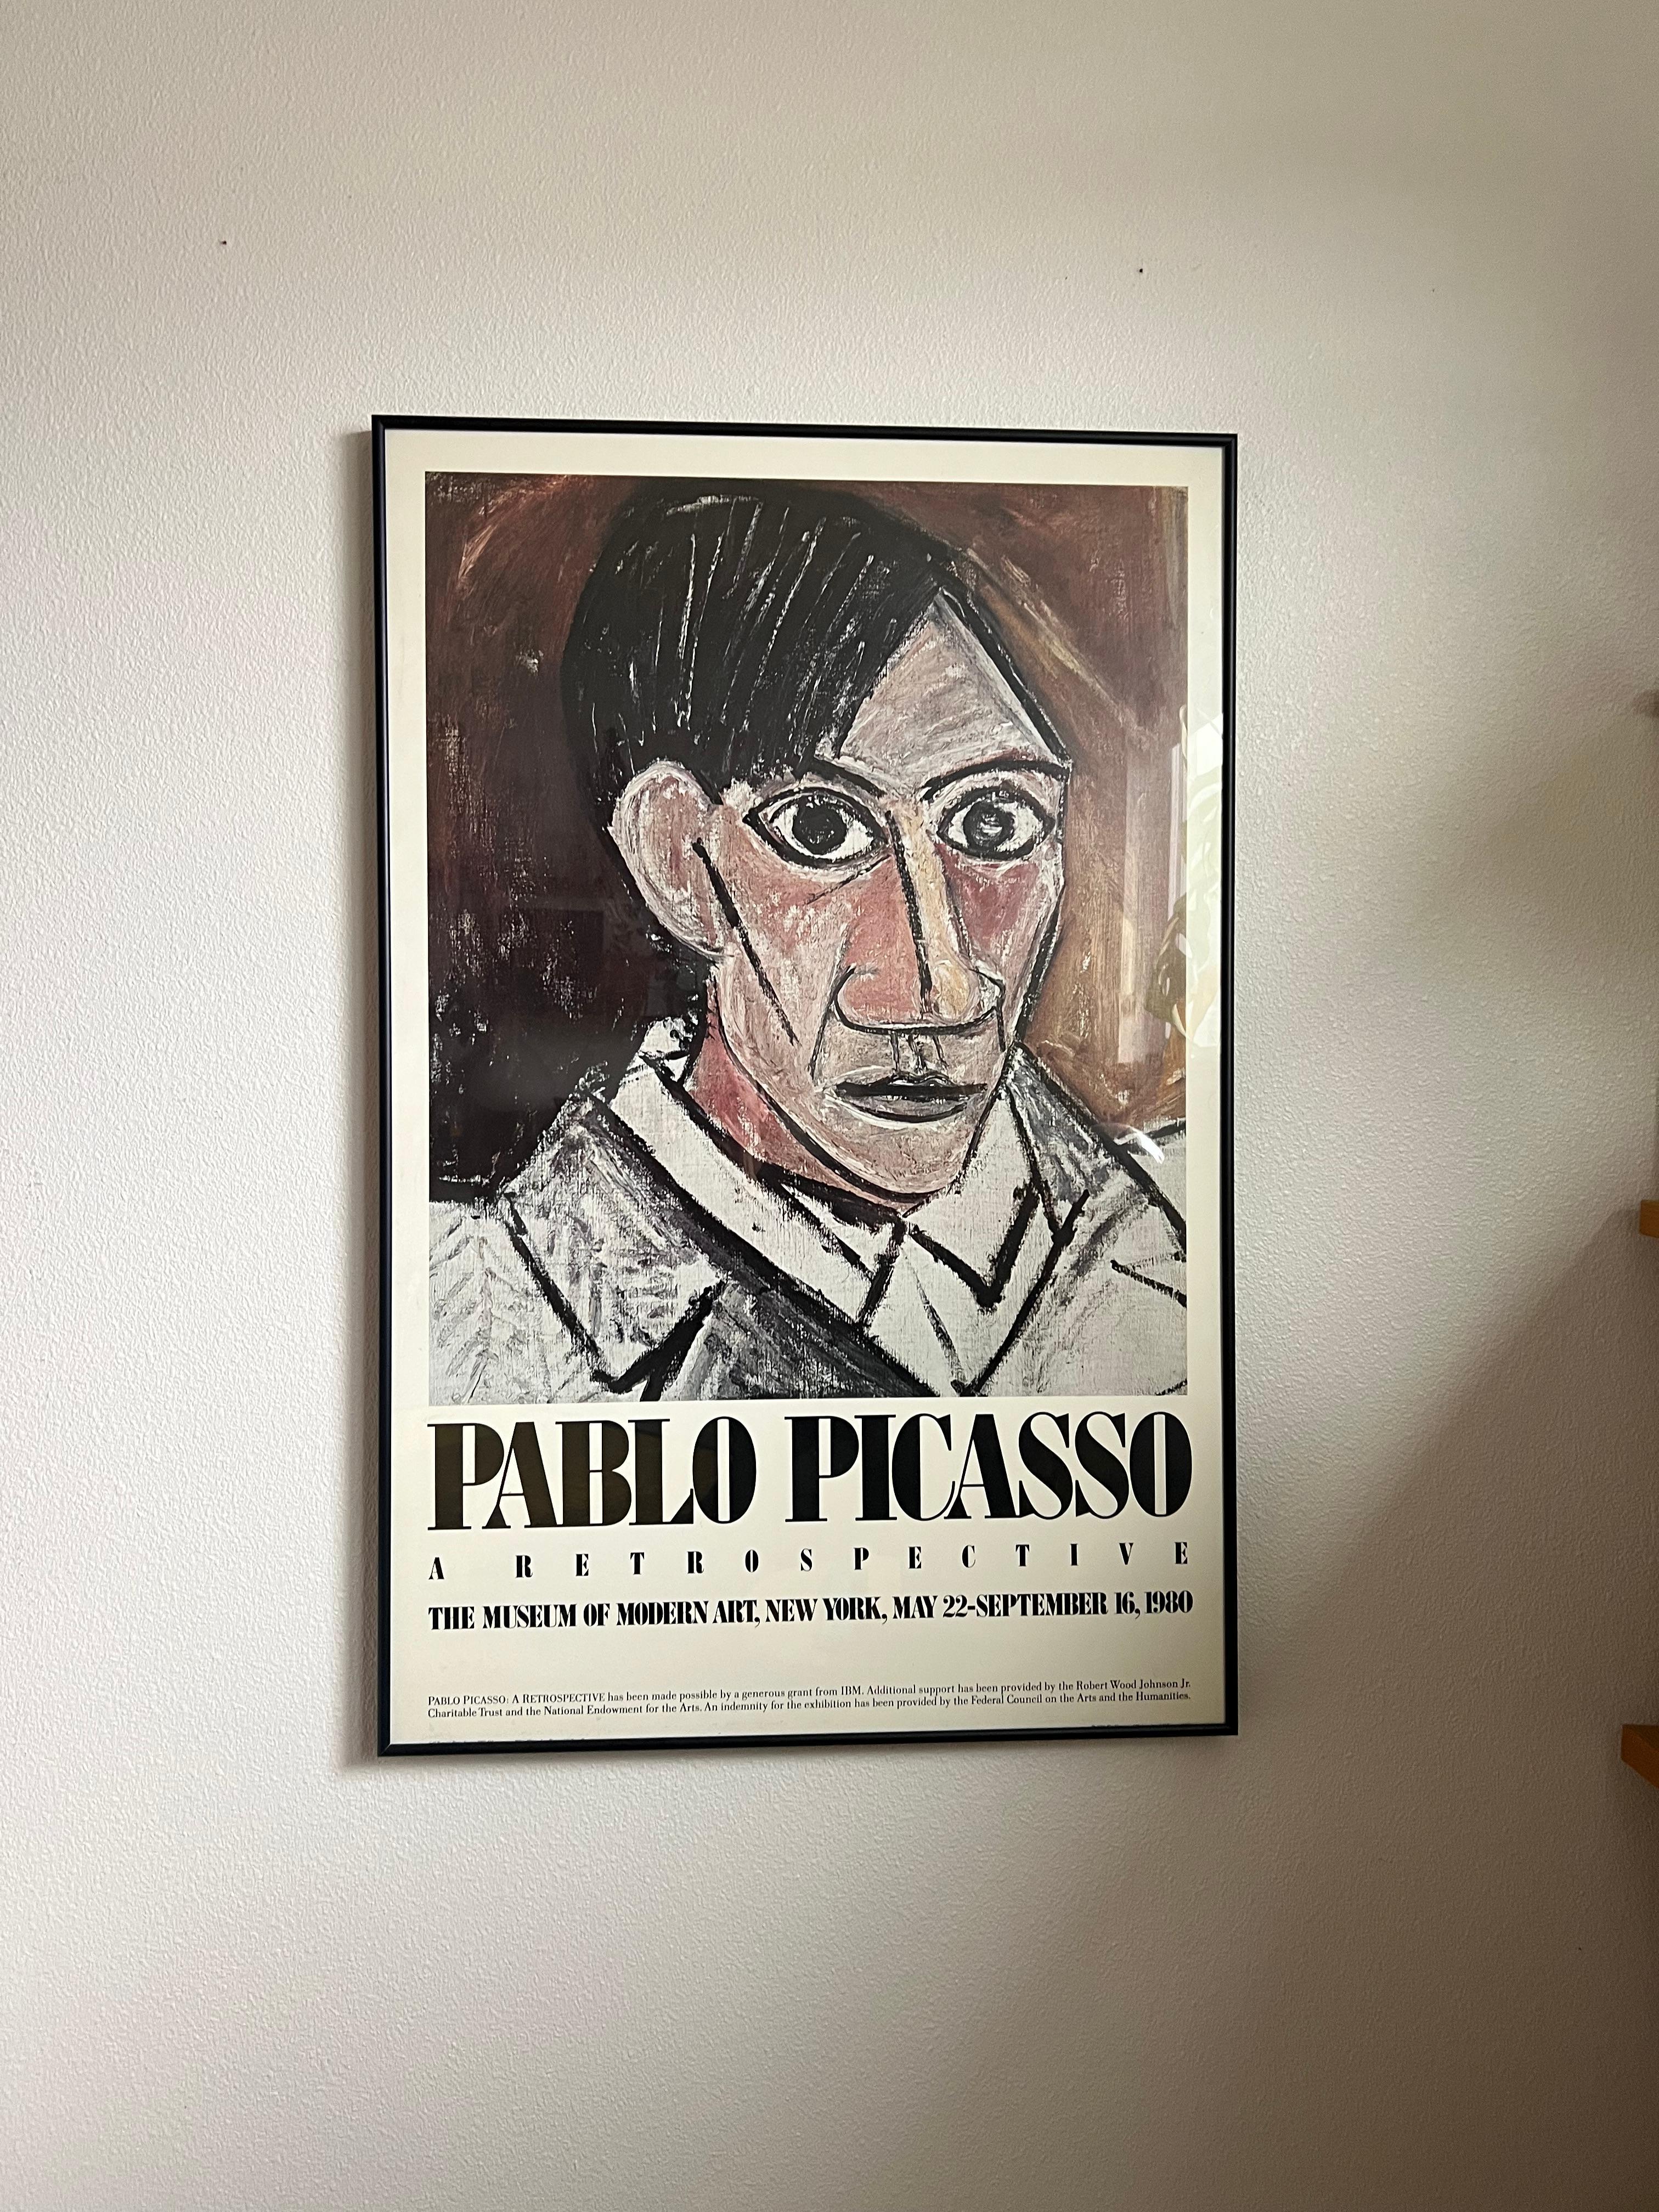 Original Pablo Picasso glass framed Exhibition Poster From MOMA.
Pablo Picasso A retrospective From the museum of modern art New york from May 22nd- September 16th, 1980 

One of the most well known and prolific artist from of modern art and